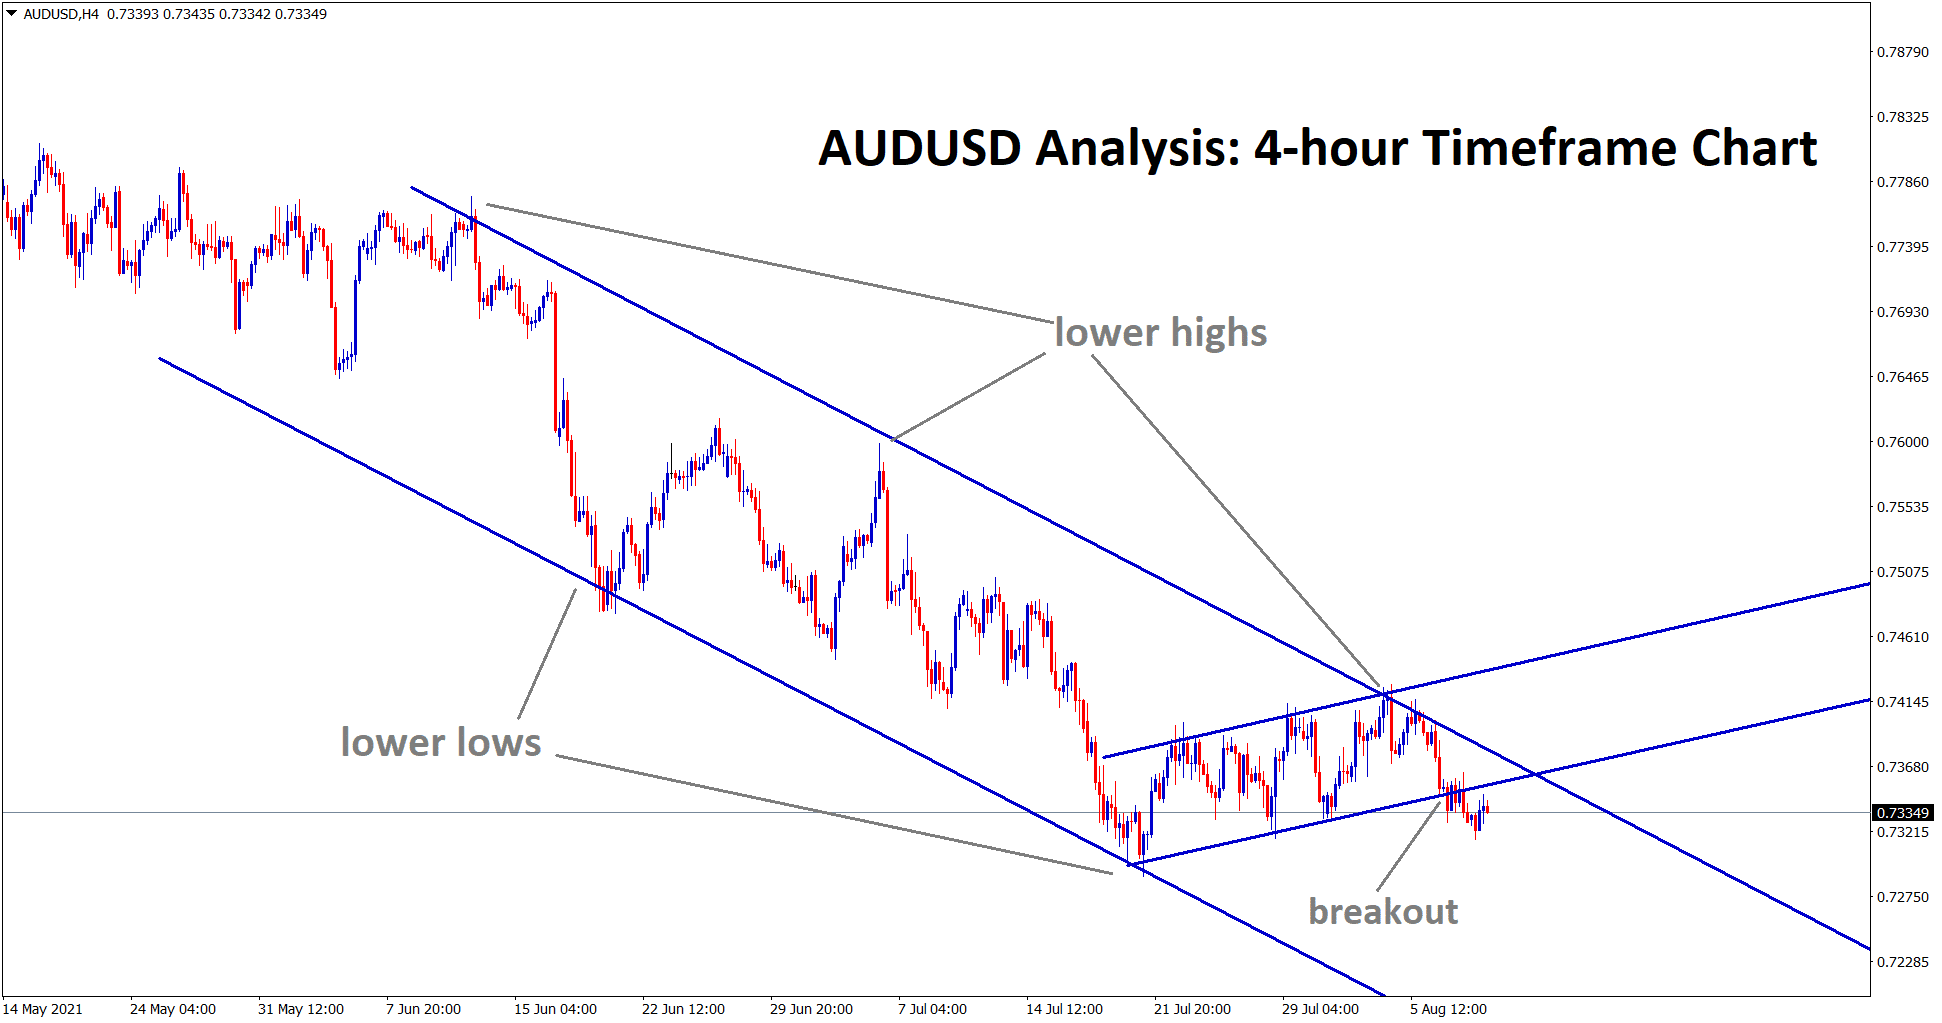 AUDUSD has broken the bottom level of the minor ascending channel